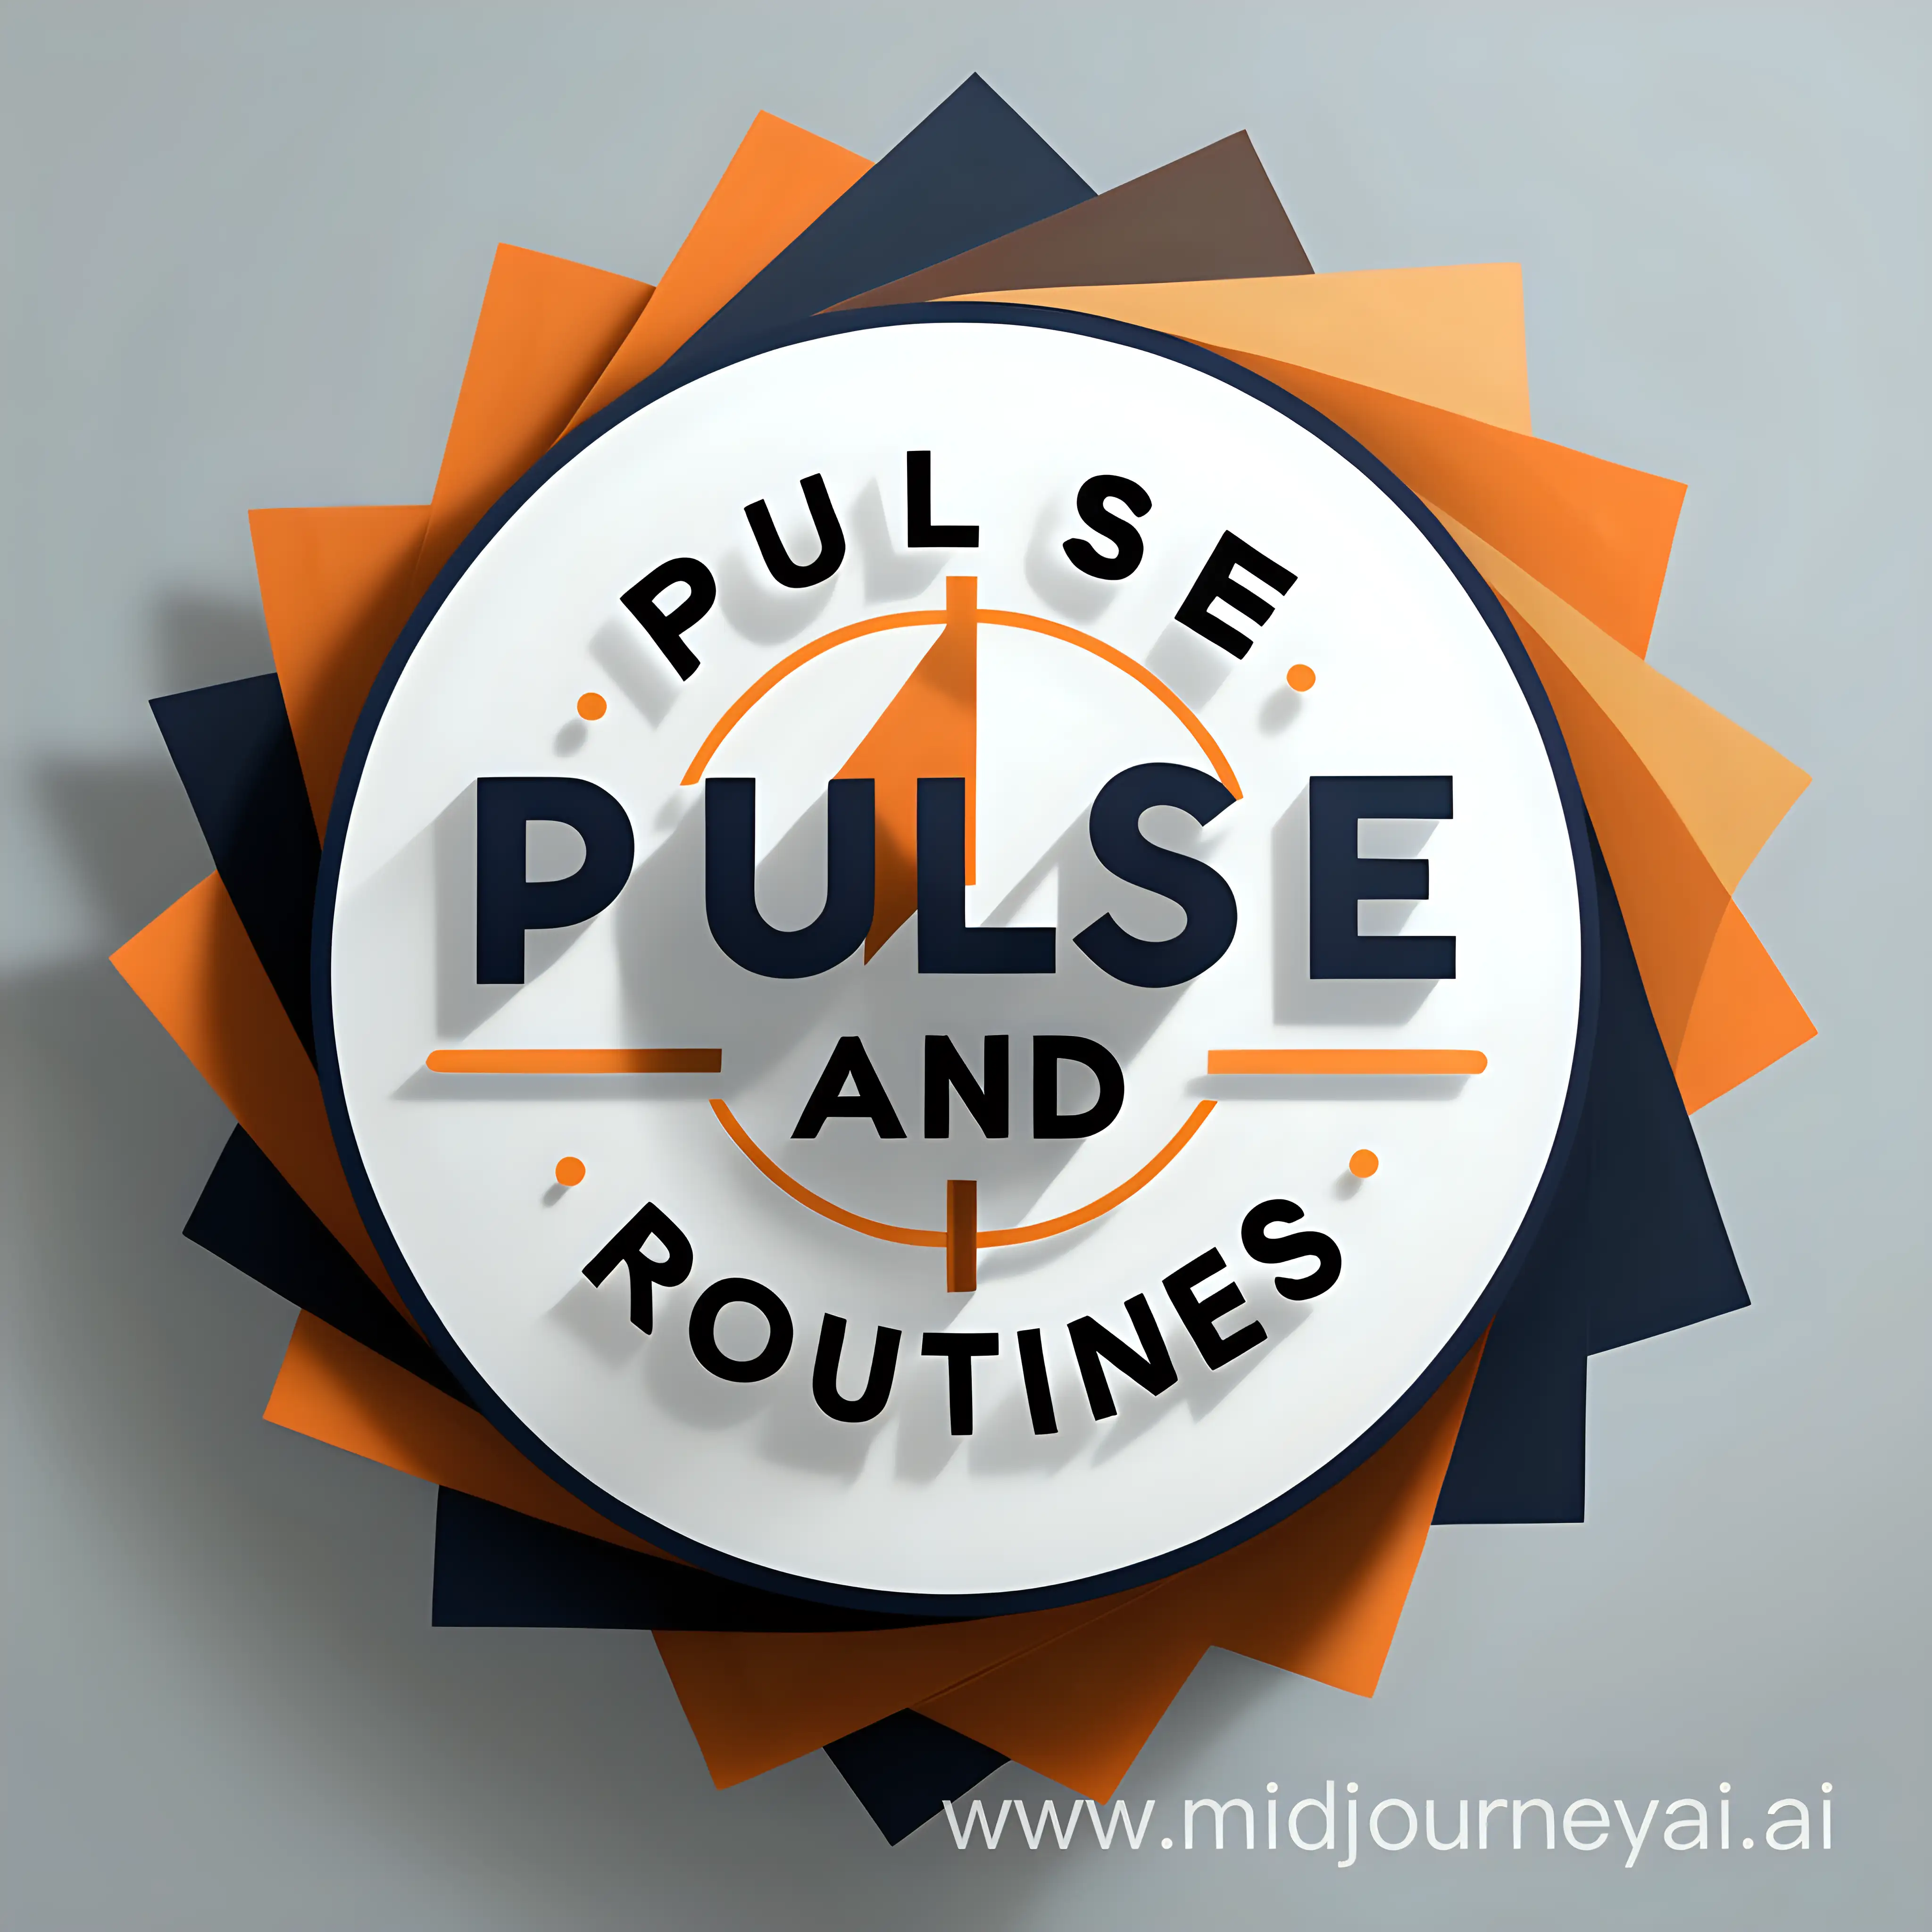 logo that goes with the slogan, "pulse and routines"